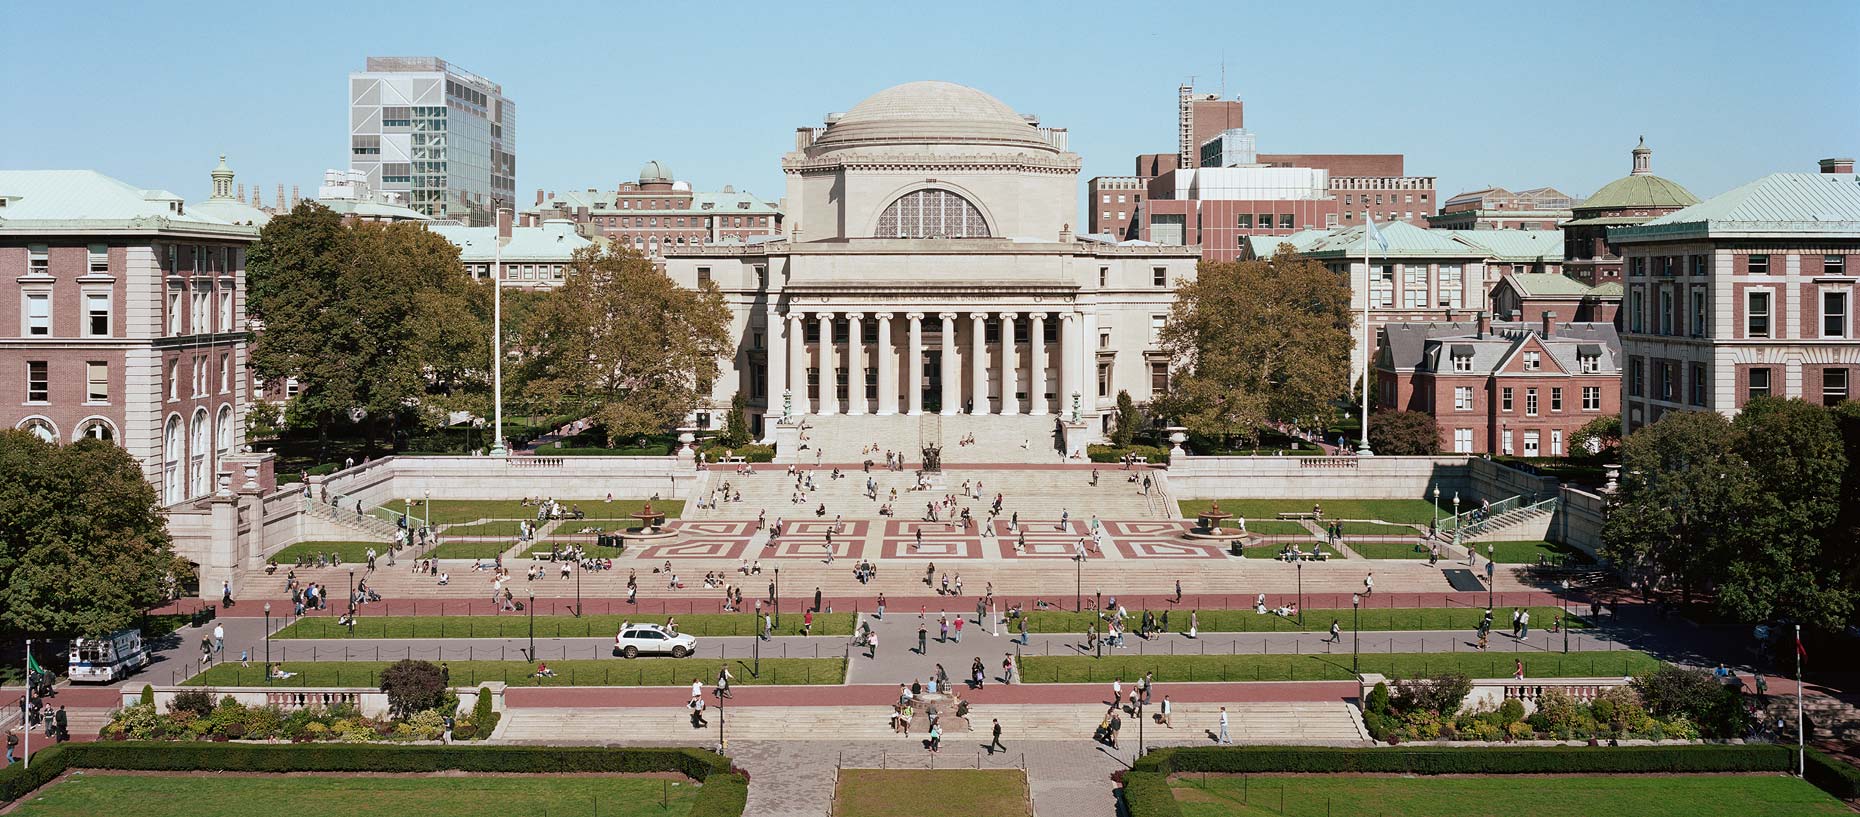 Download this Columbia University picture